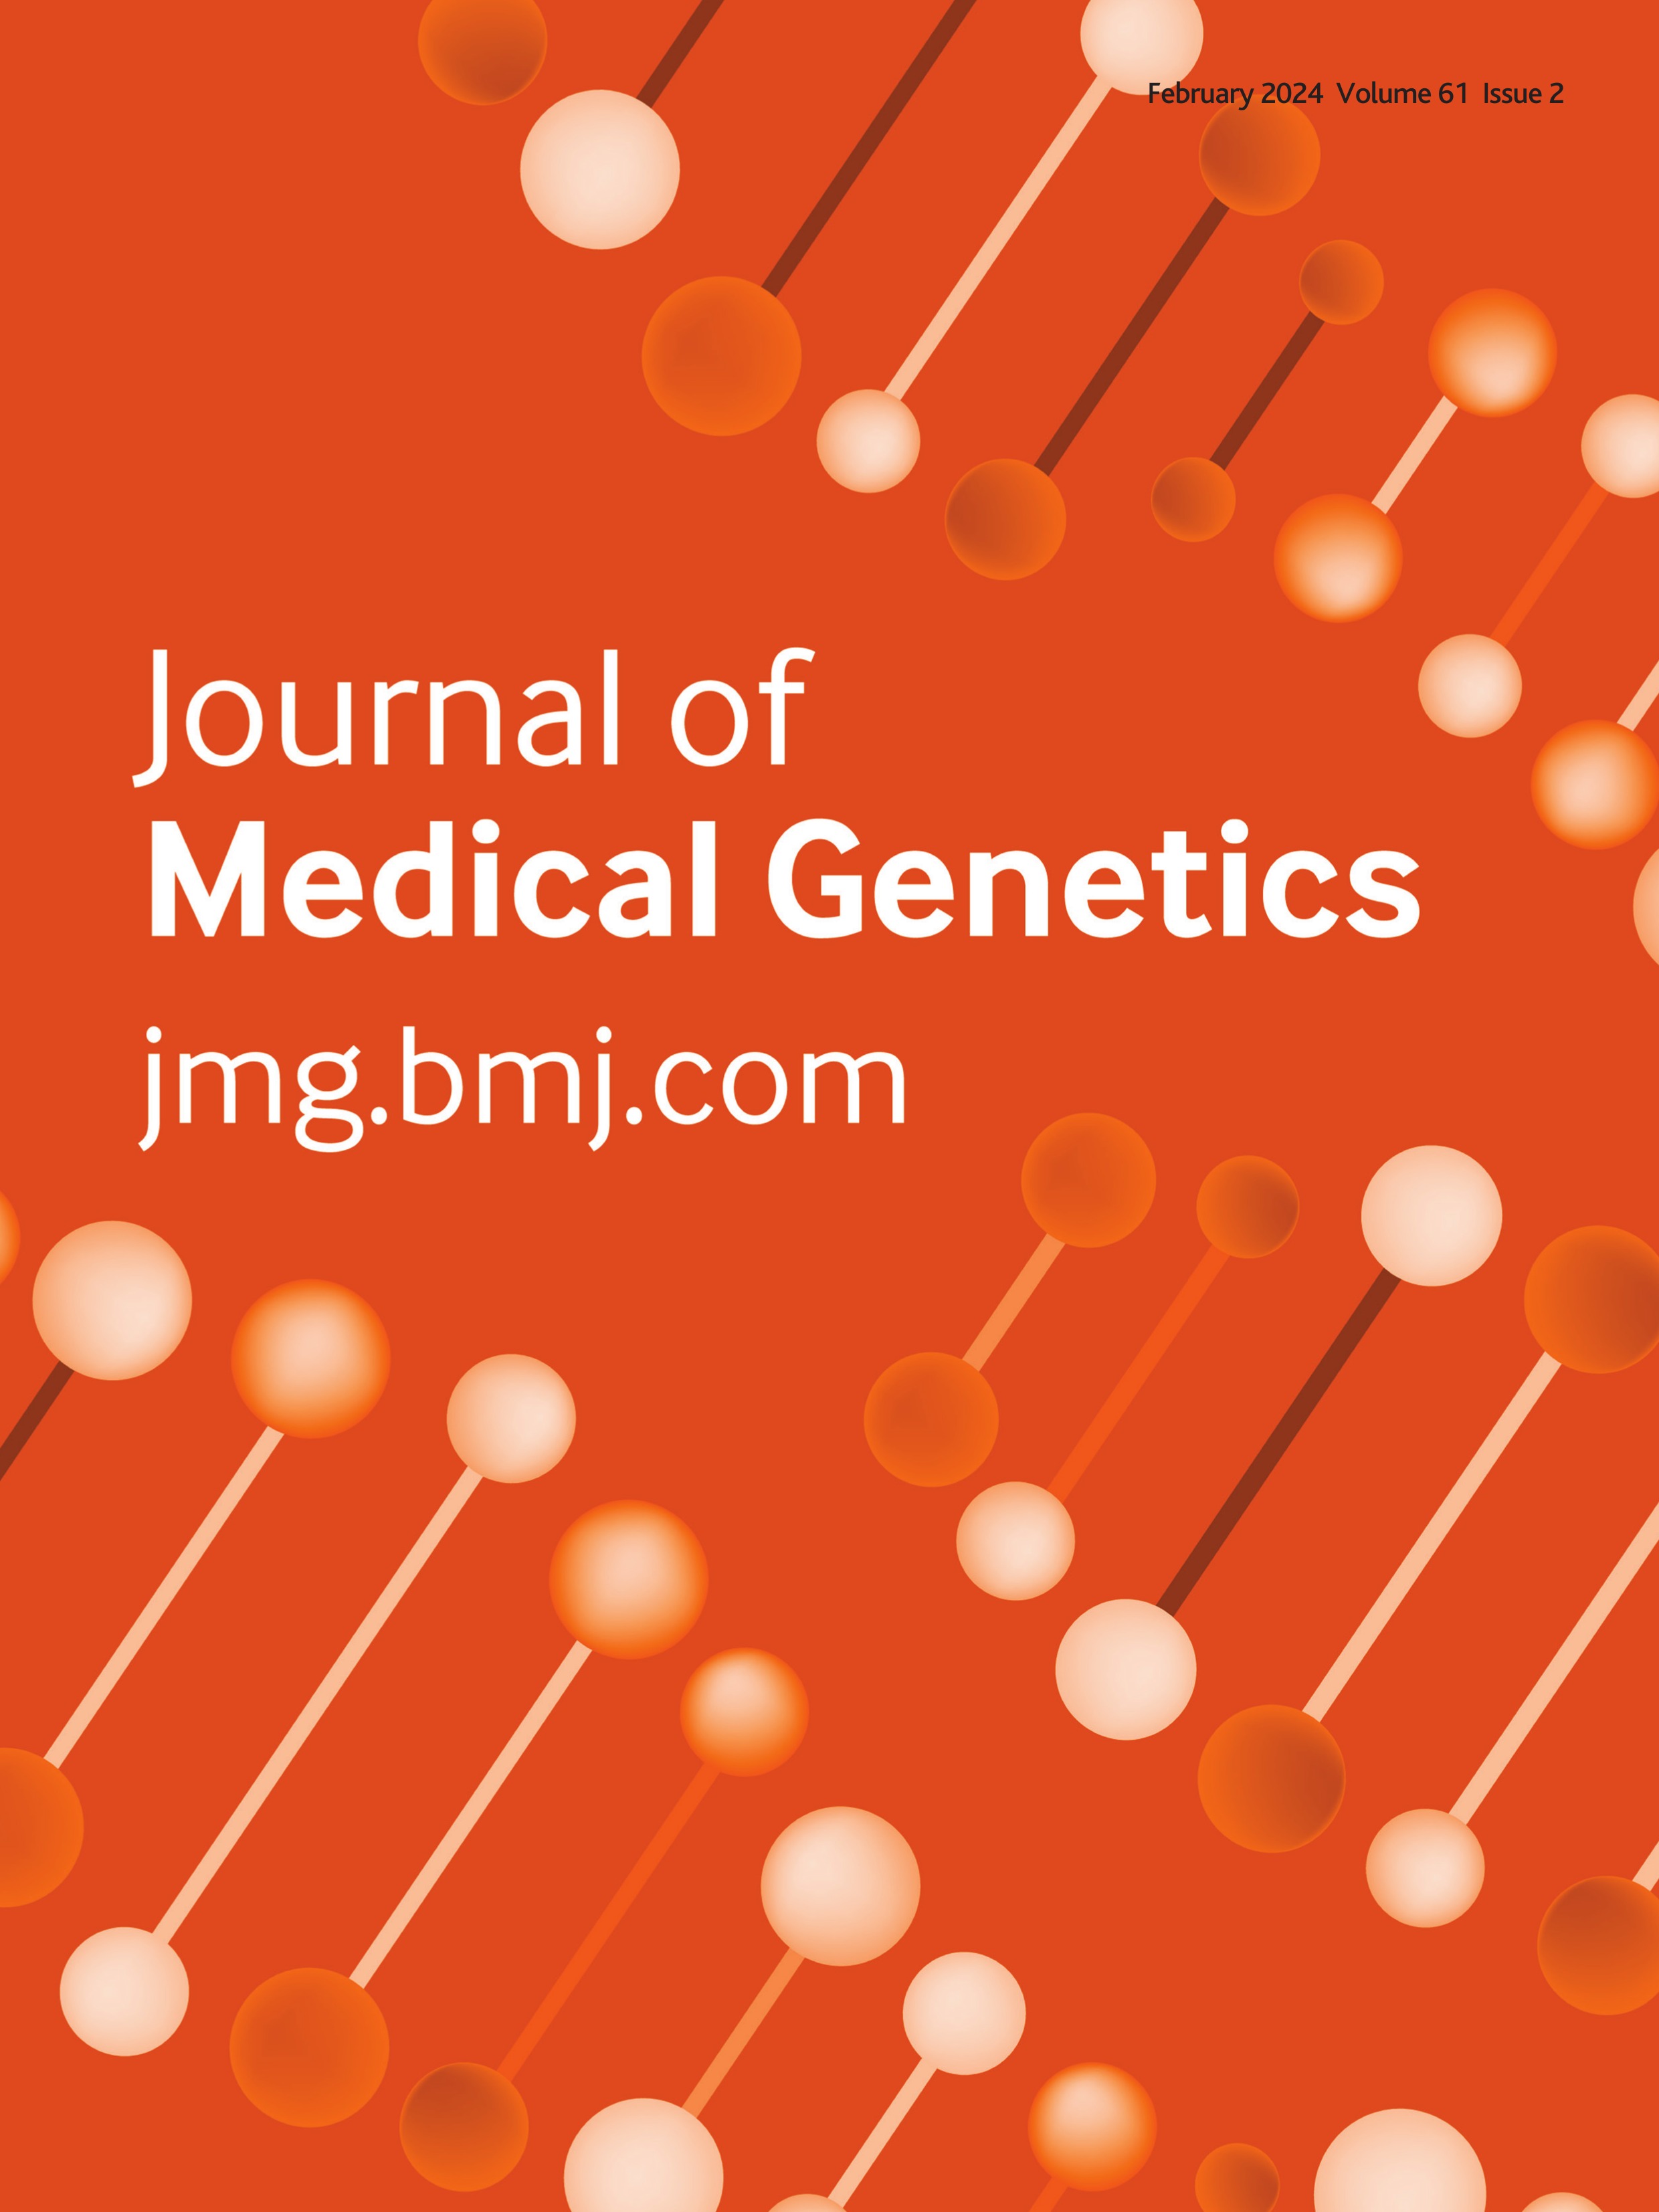 Weill-Marchesani syndrome: natural history and genotype-phenotype correlations from 18 news cases and review of literature